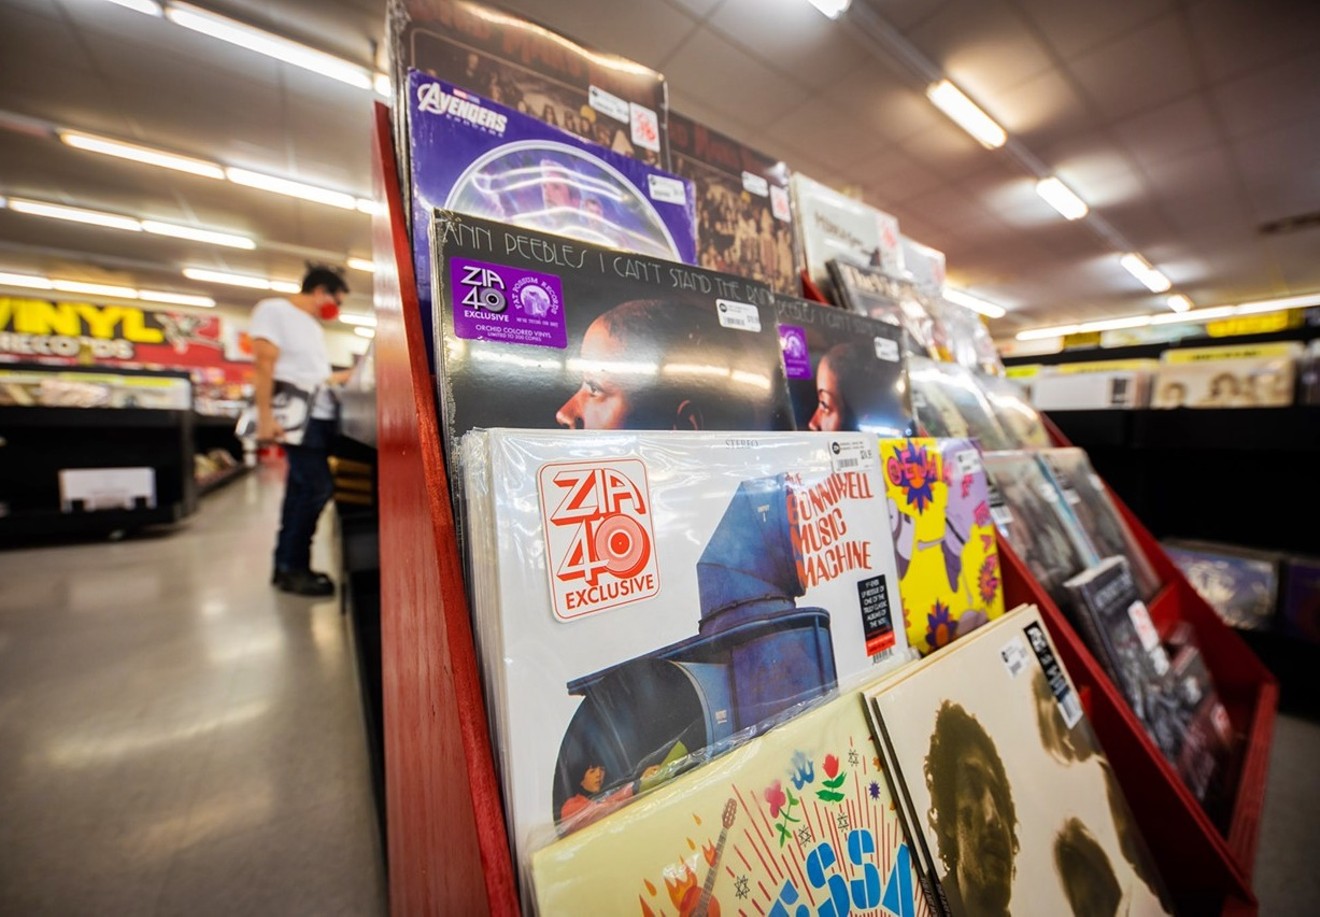 Zia Records turns 40 this year. We've assembled a playlist of memories from over the decades.